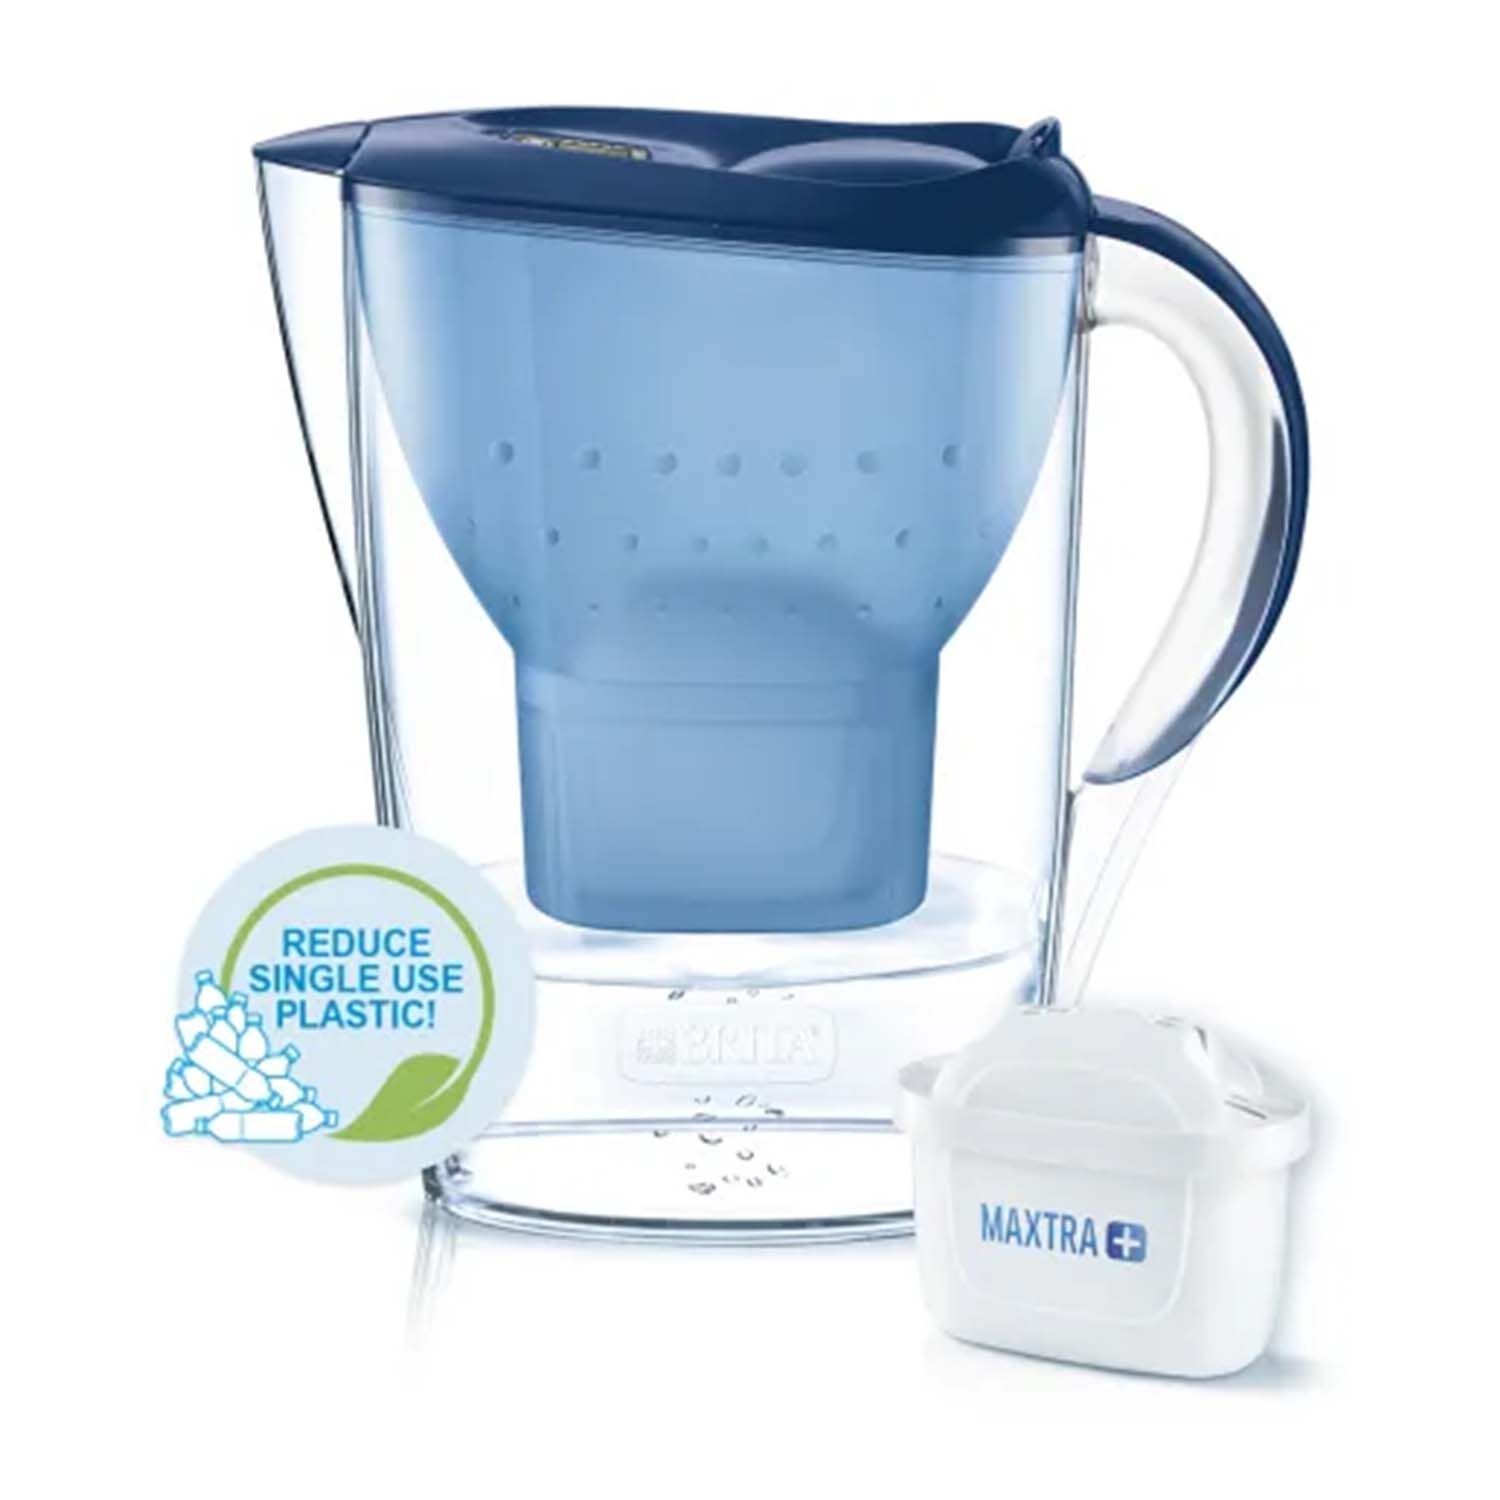 Brita Maxtra Plus 5+1 Water Filter Cartridges - Home Store + More